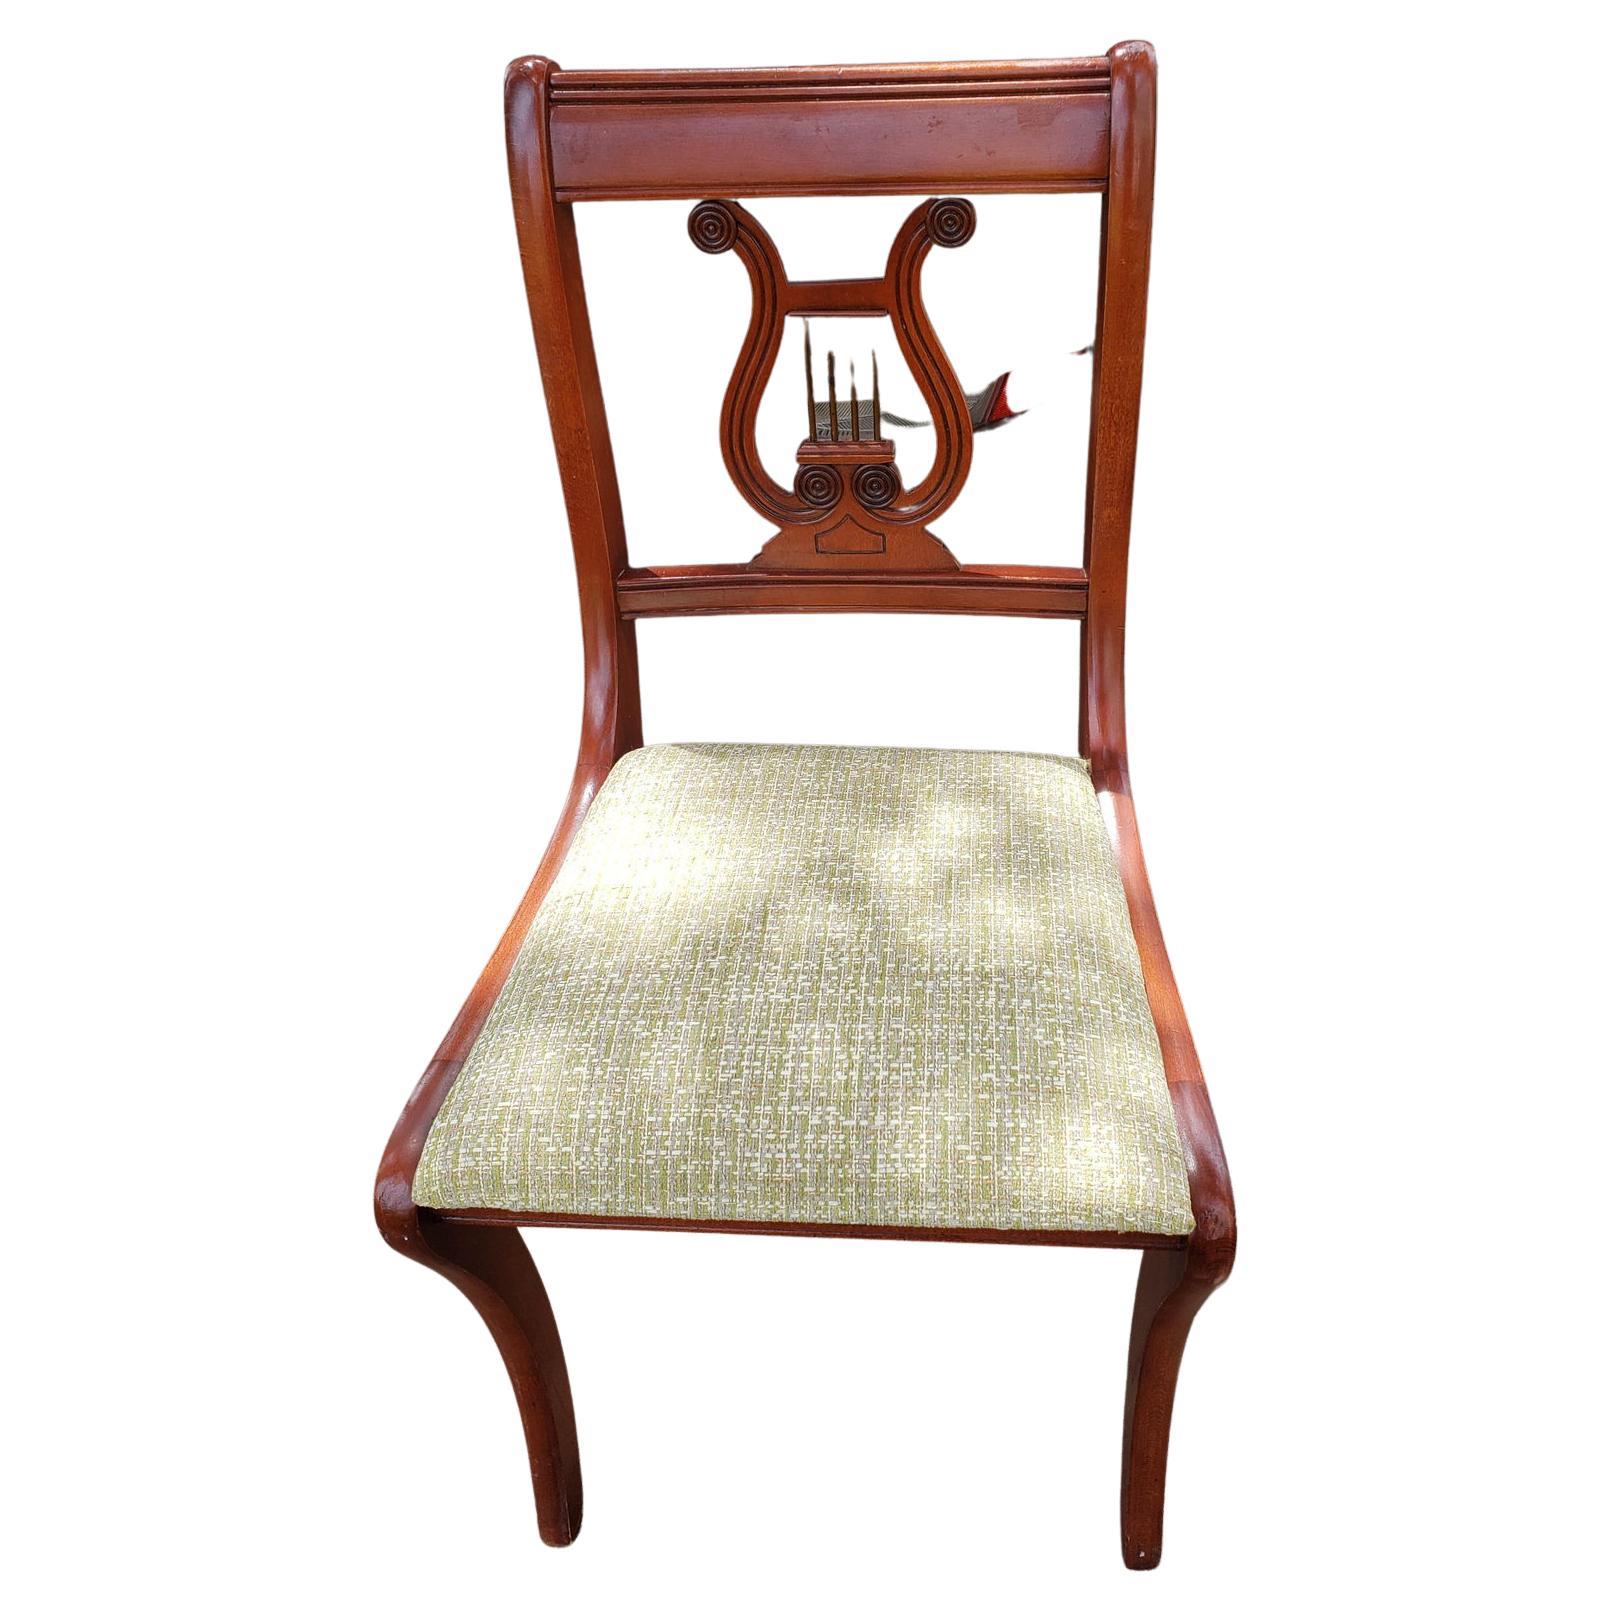 Pair of Lyre back Side Chair or Harp Back chair.
Both Excellent us chairs are in excellent condition.
Made out of wood. Upholstery on both chairs is in great condition.
Elegant and sturdy as well. Constructed after the designs made famous by